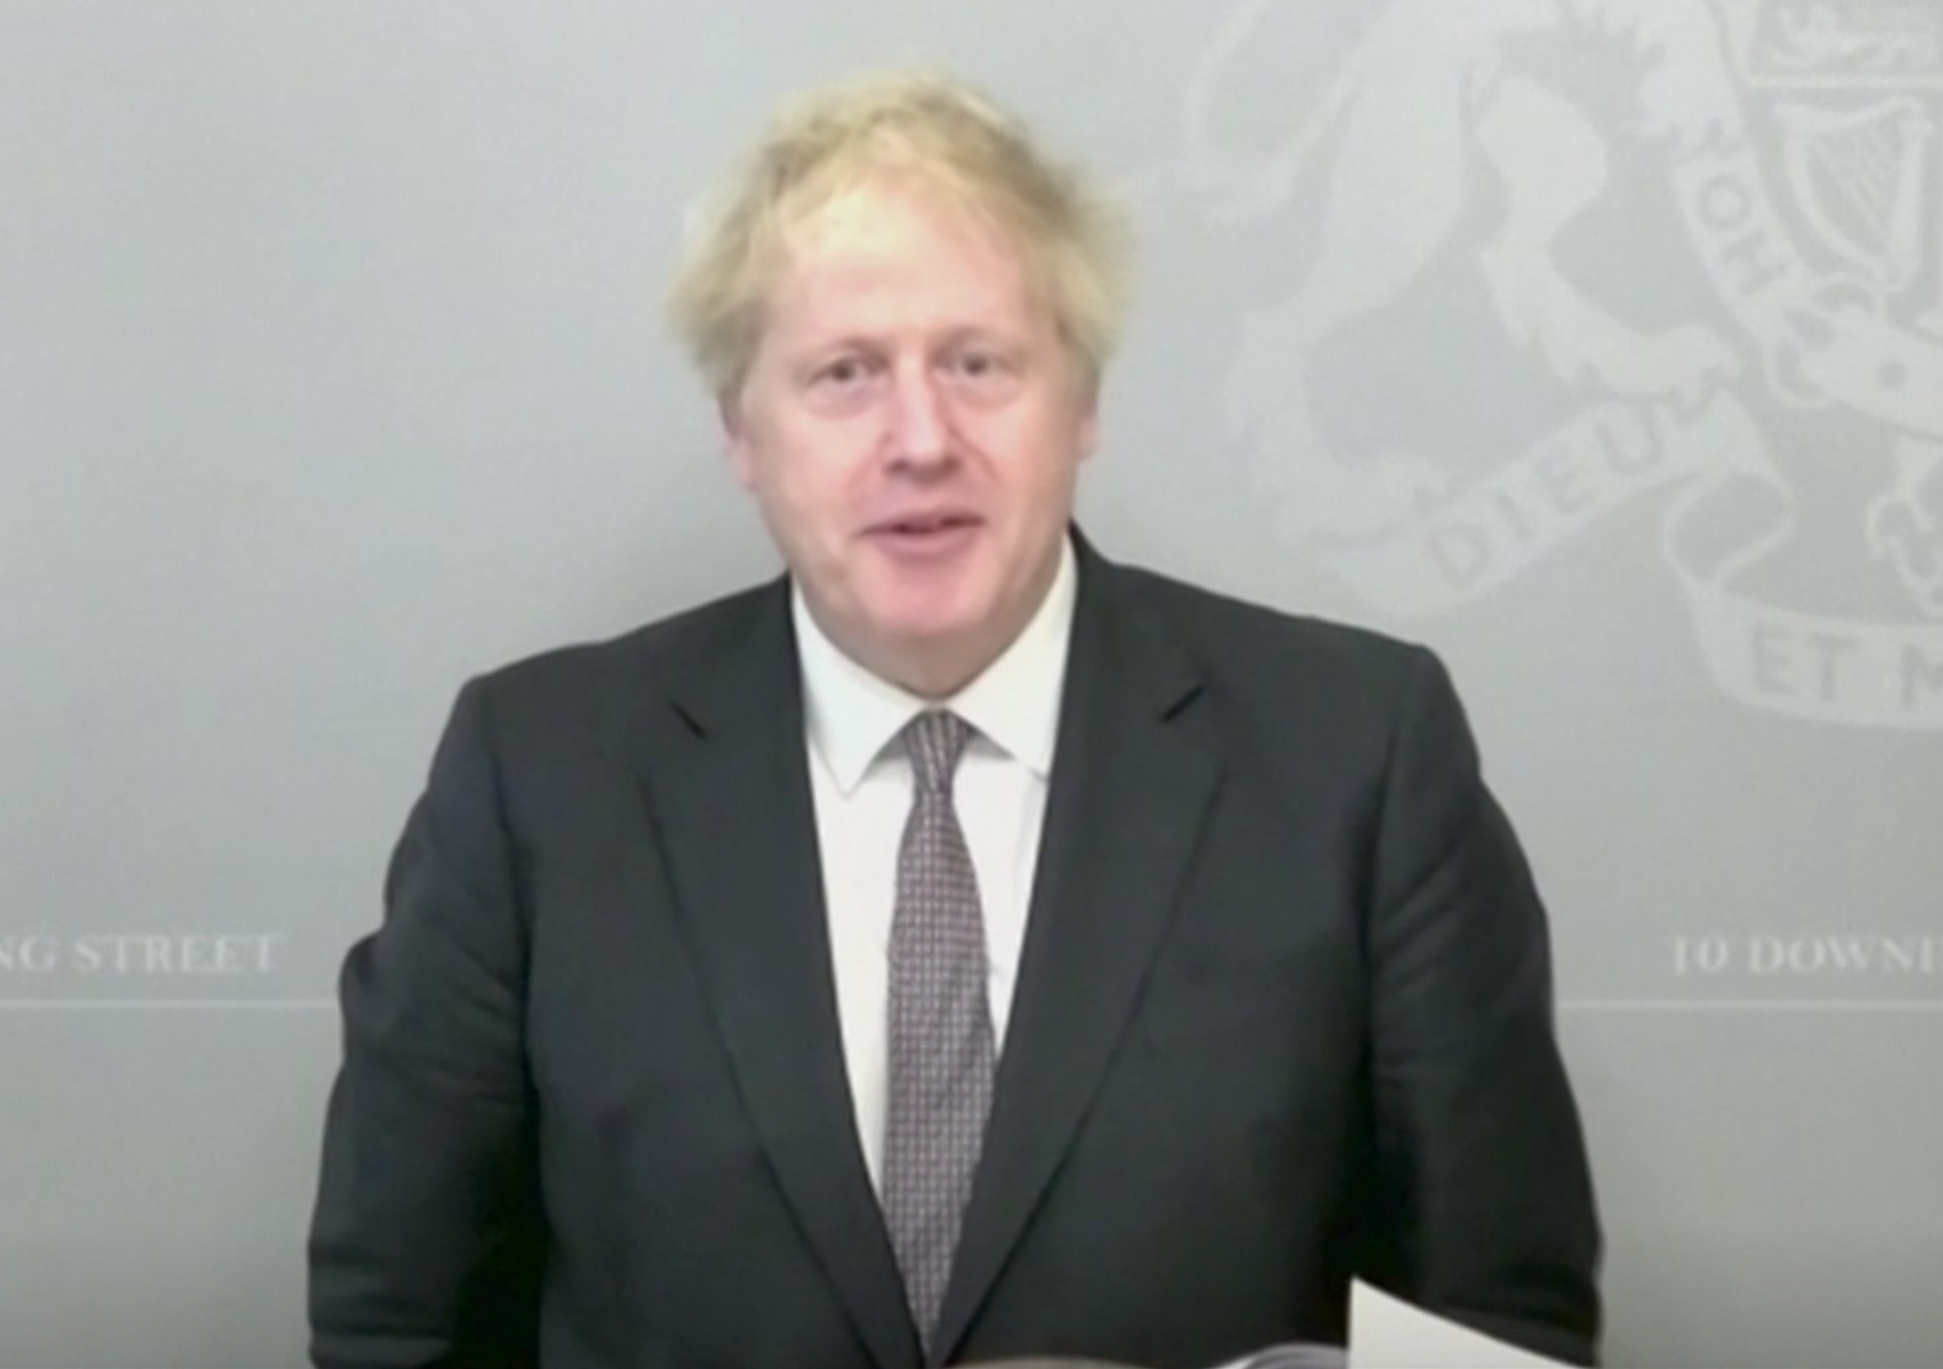 Mr Johnson attended Prime Minister’s Questions ‘virtually’ today